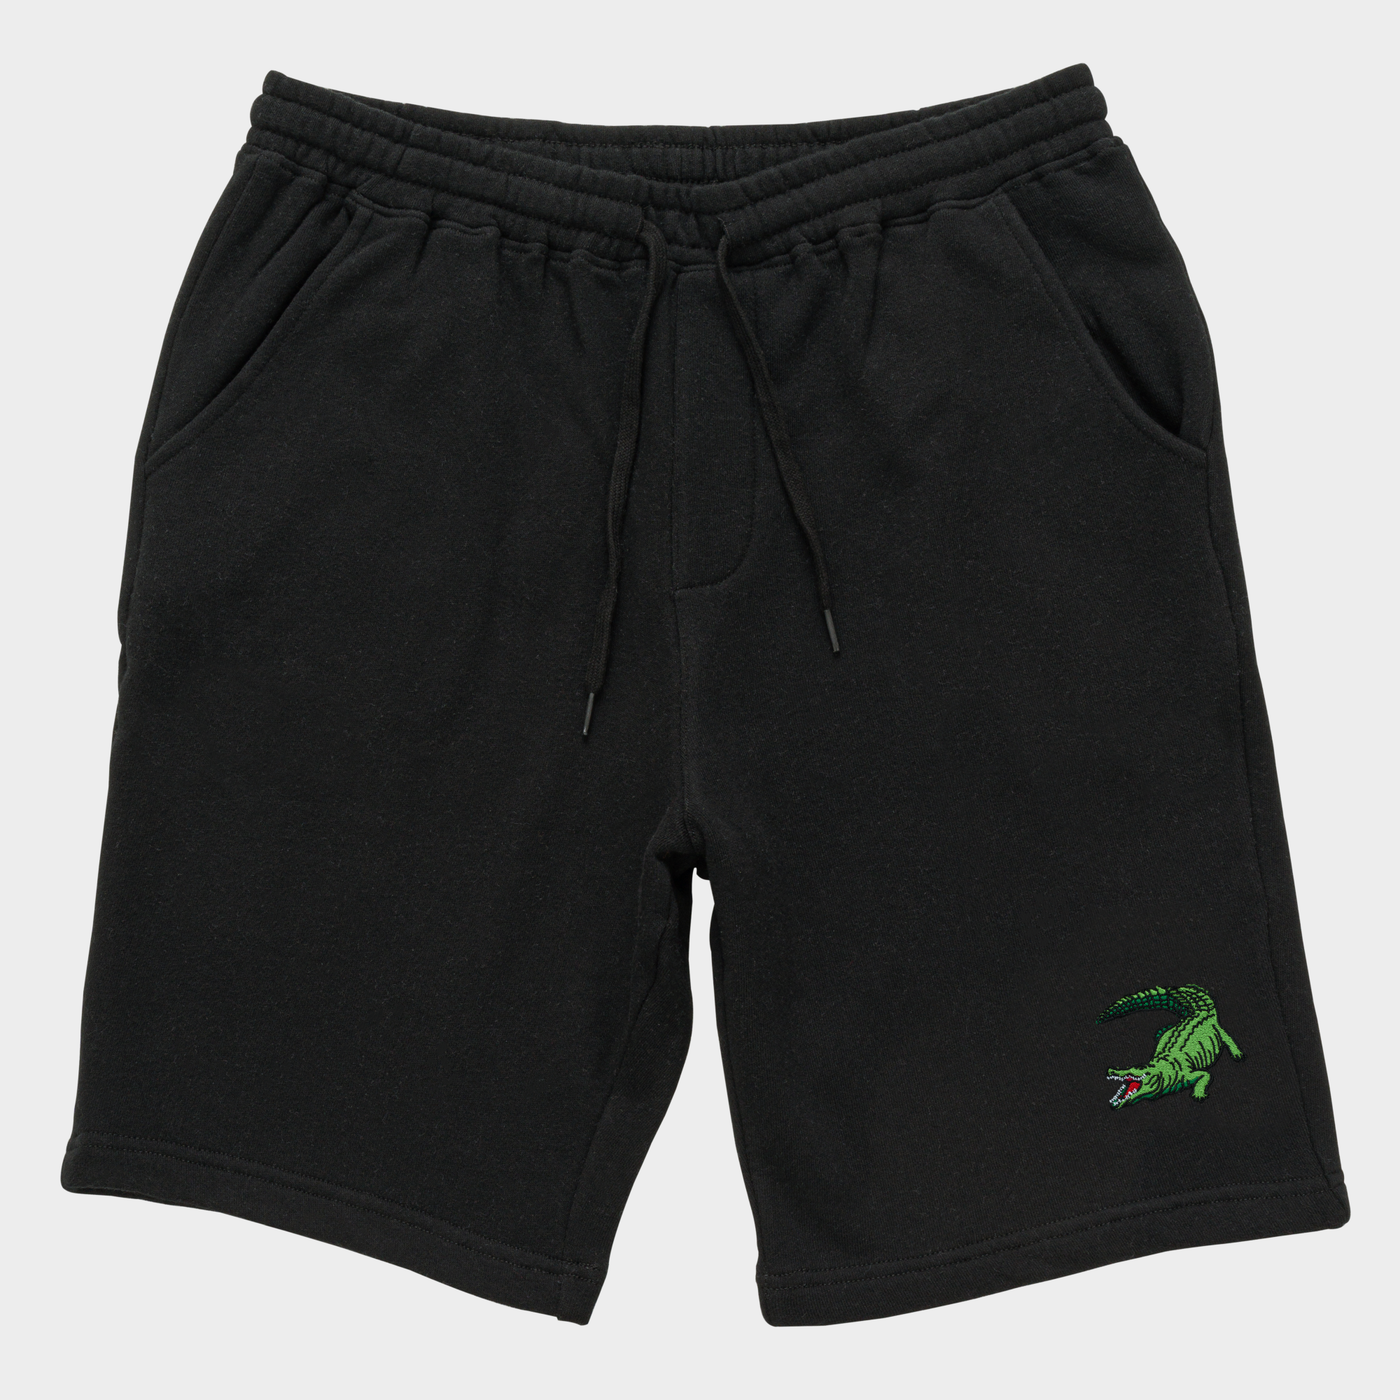 Bobby's Planet Men's Embroidered Saltwater Crocodile Shorts from Australia Down Under Animals Collection in Black Color#color_black